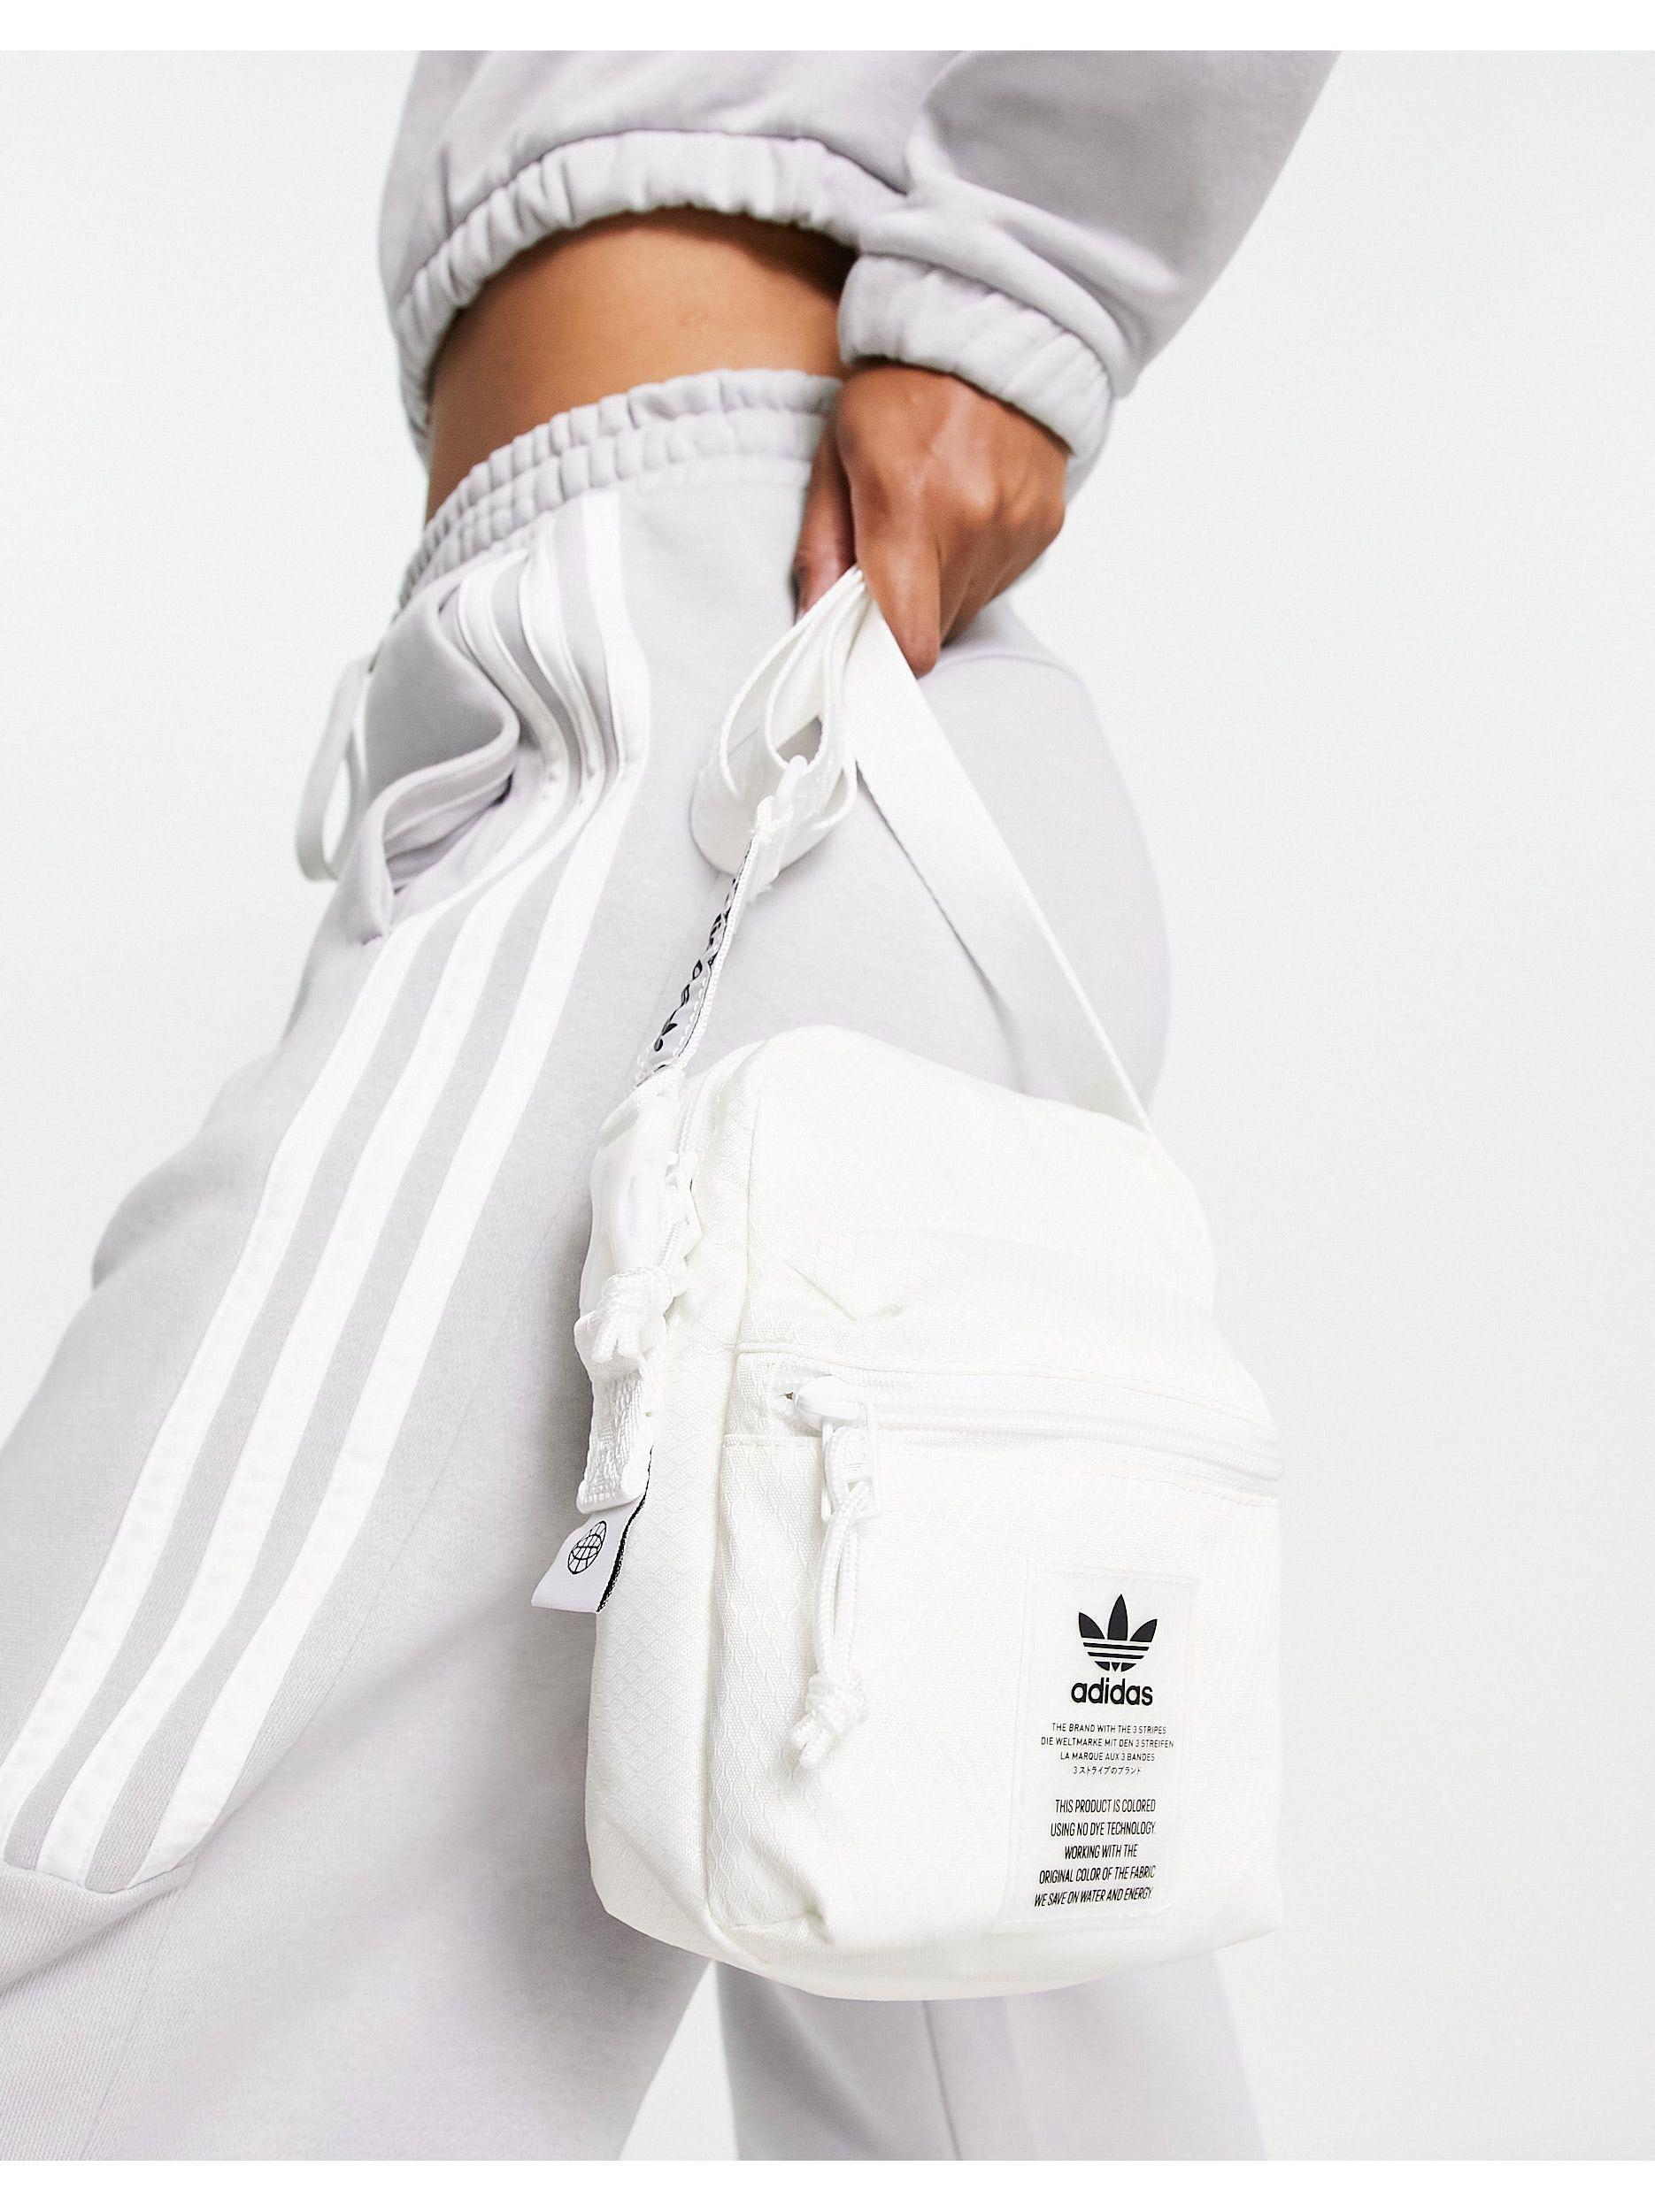 adidas Originals Non Dyed Festival Crossbody Bag in White | Lyst